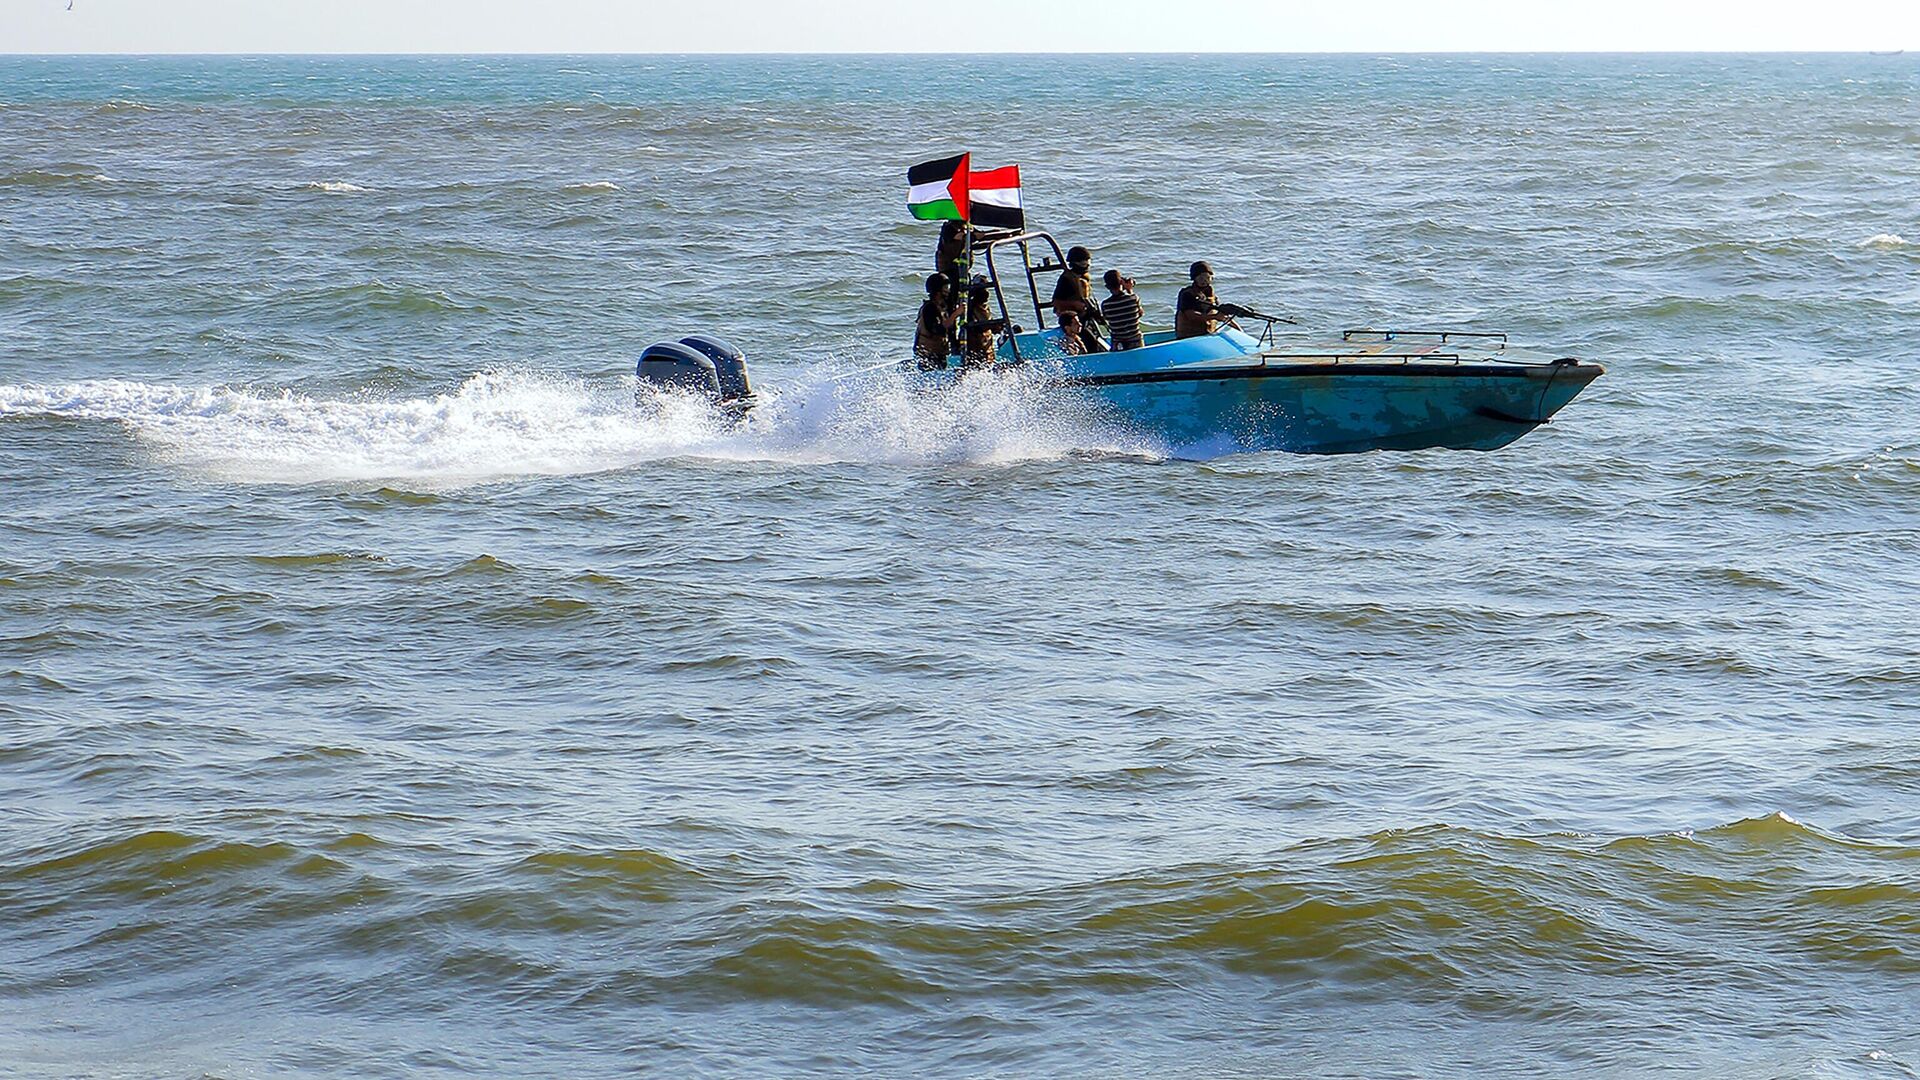 Members of the Yemeni Coast Guard affiliated with the Houthi group patrol the seaю - Sputnik International, 1920, 06.02.2024